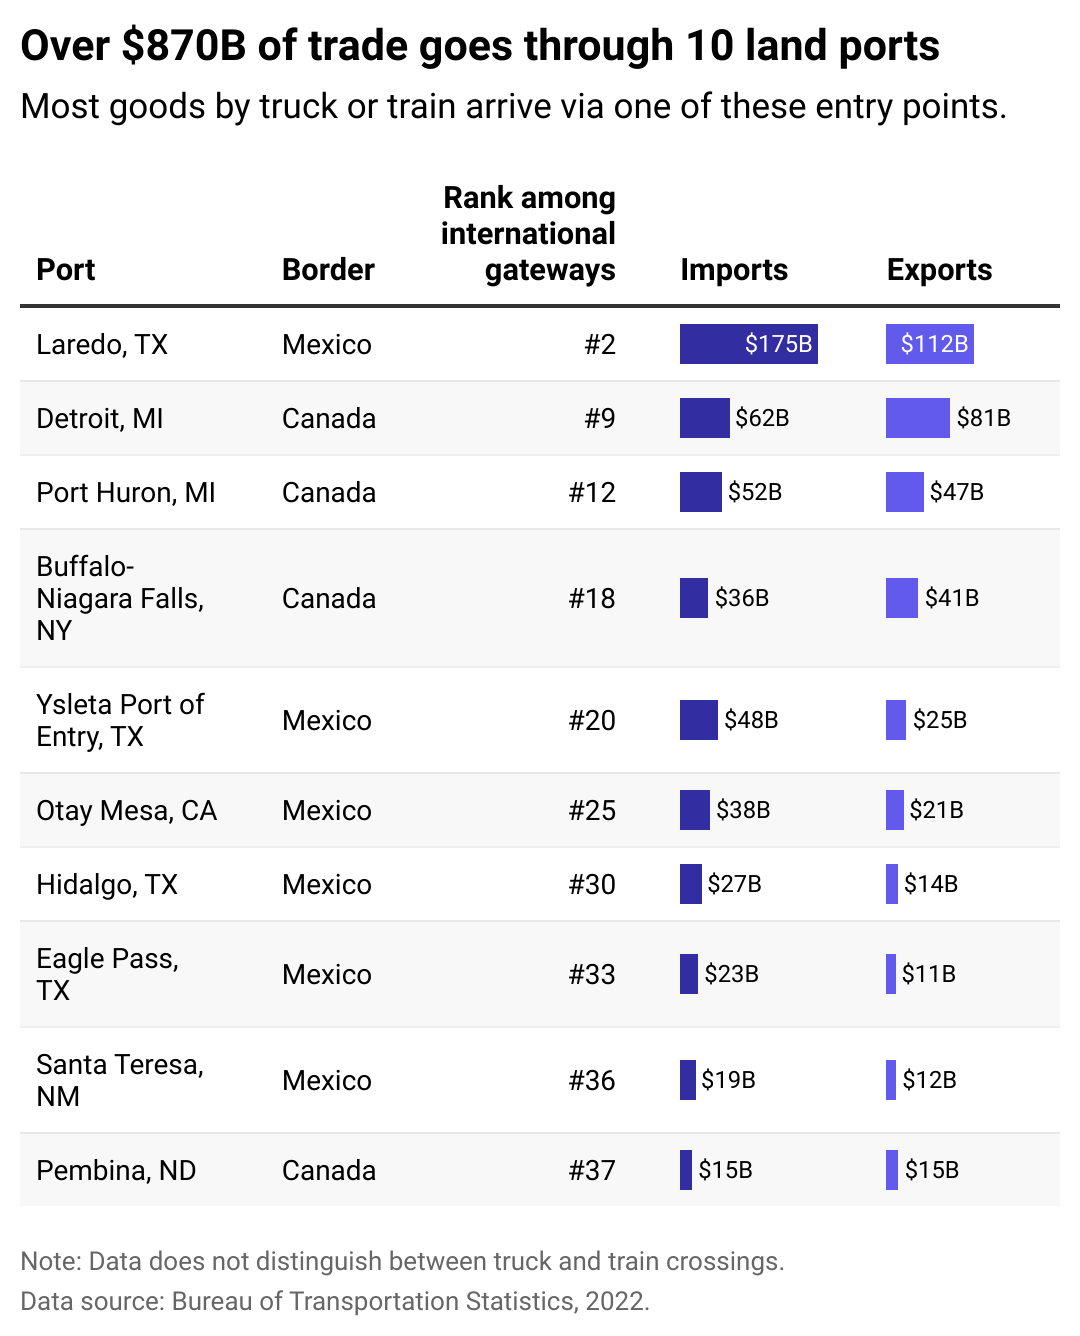 Table showing top 10 land ports in the U.S. Over $870 billion of trade goes through these ports. Laredo, Texas is the highest land port and also the #2 highest international gateway overall.